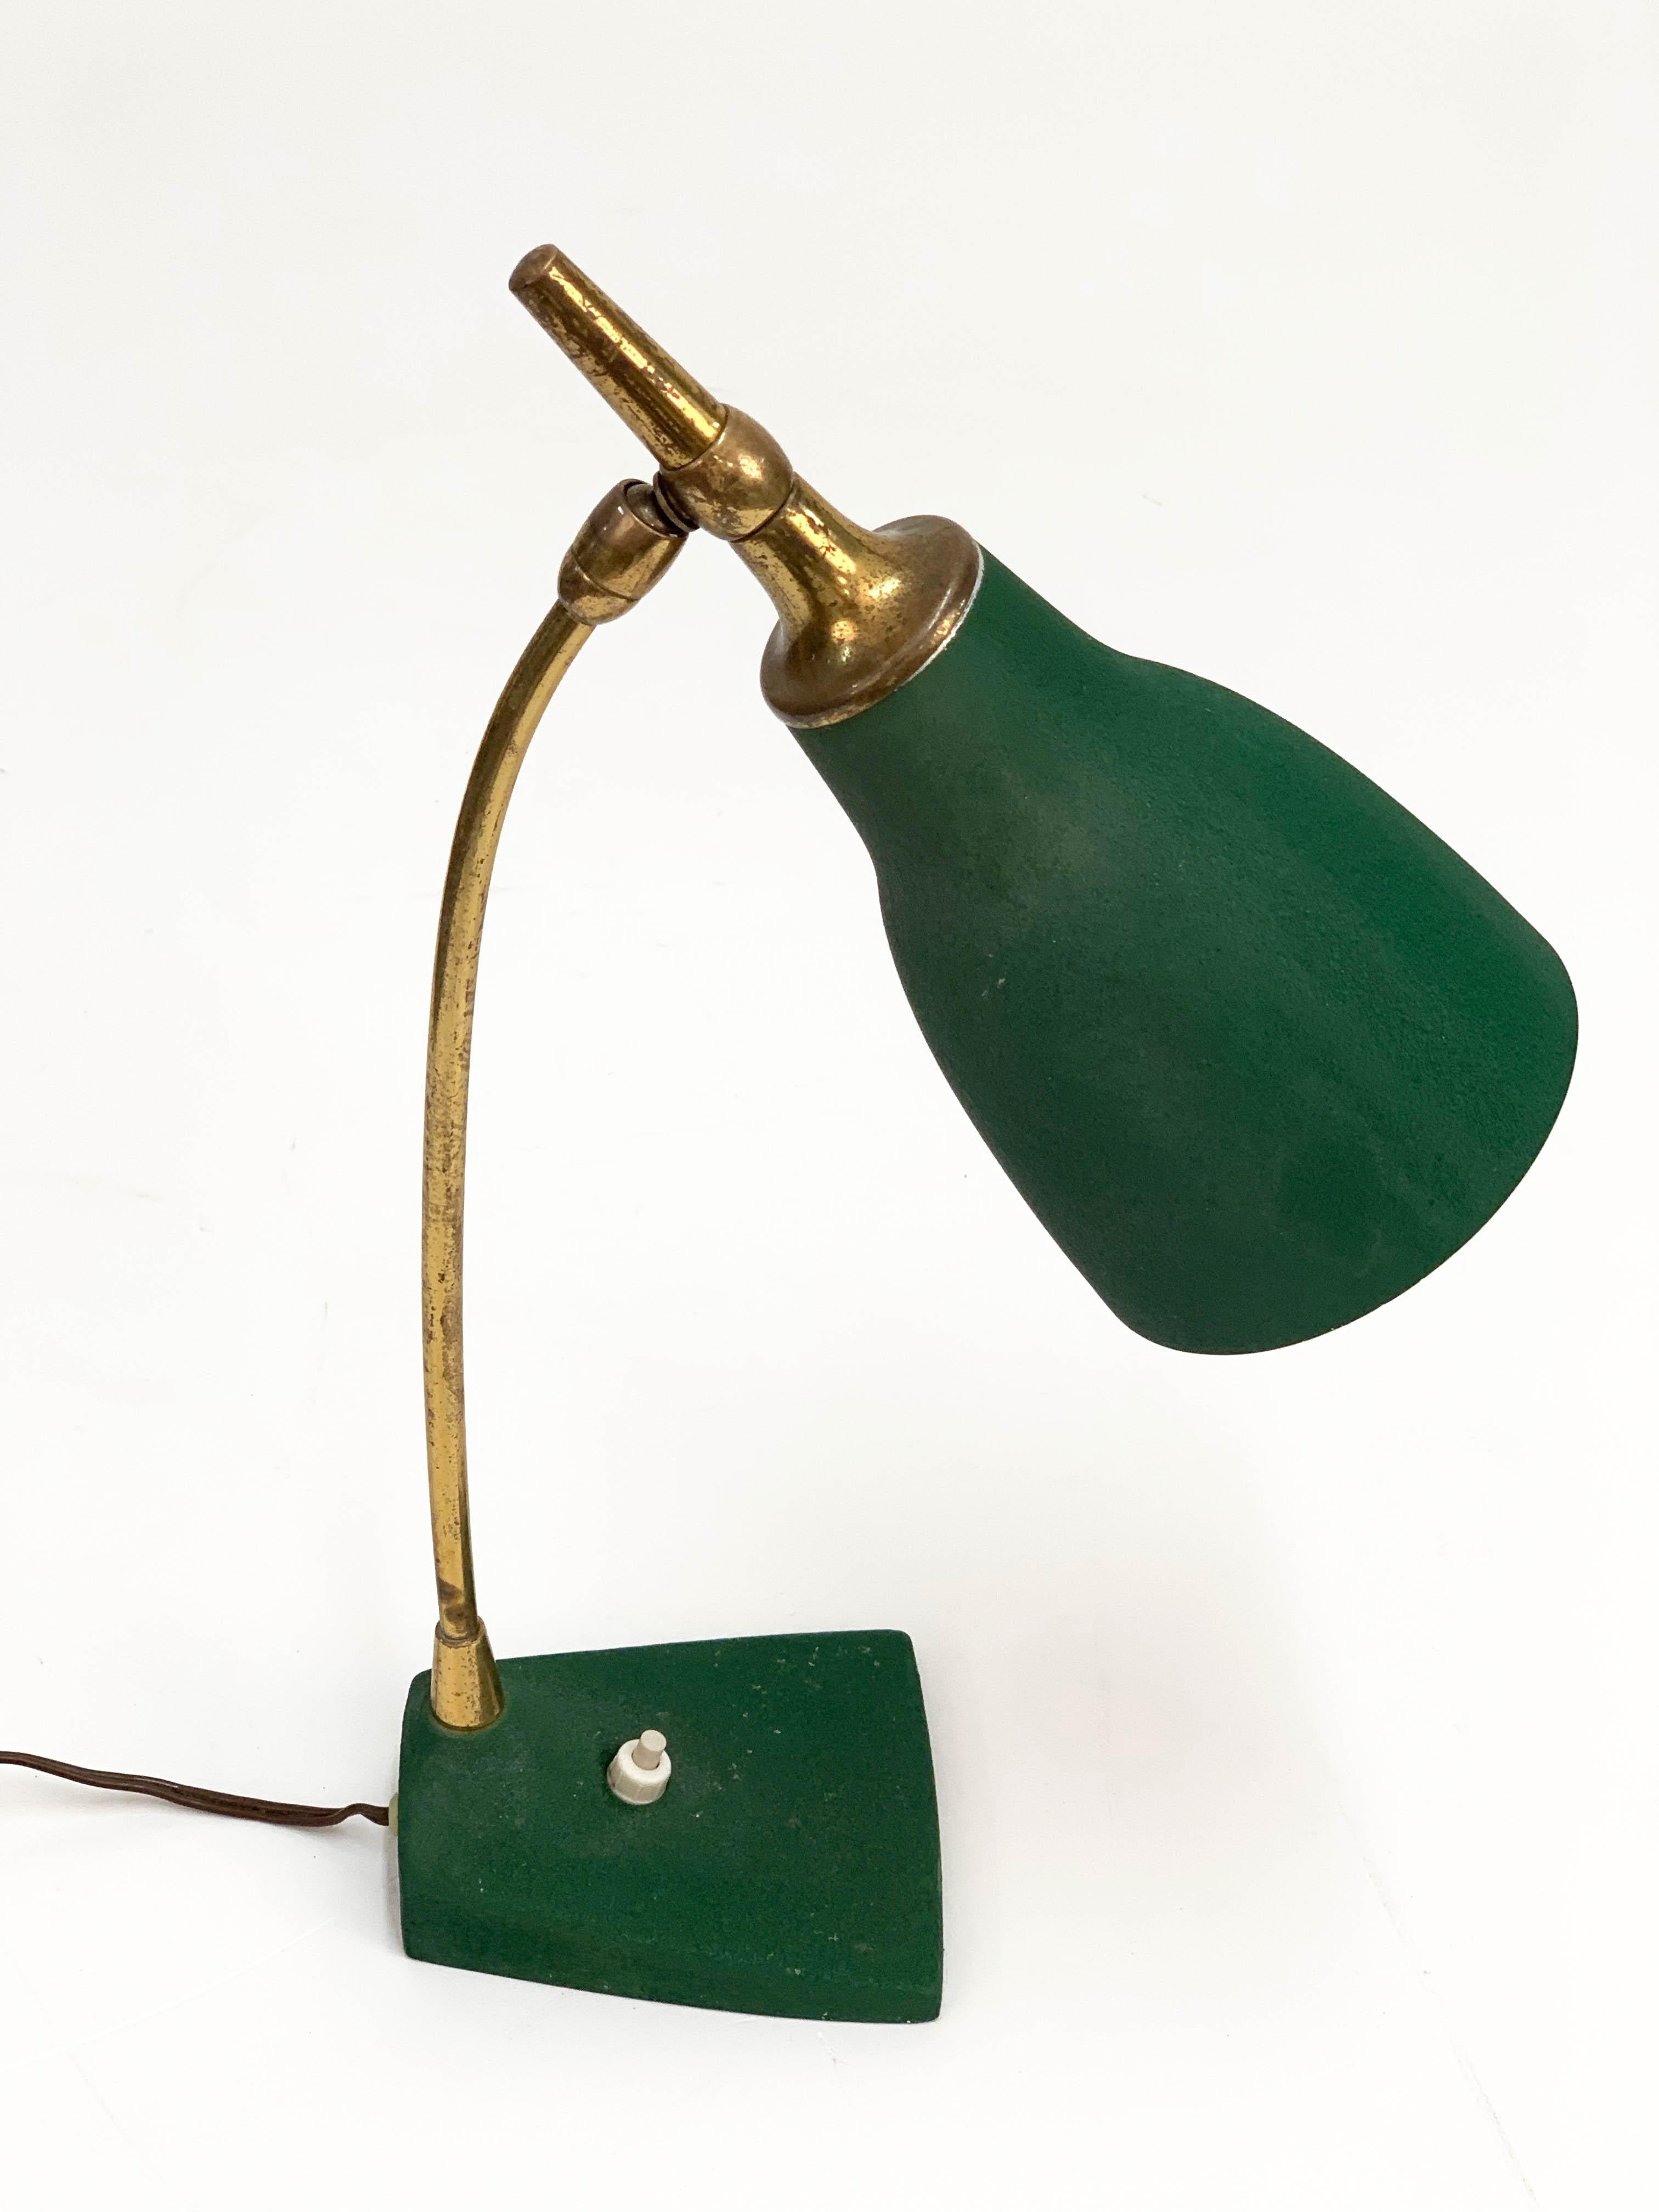 Midcentury Gebrüder Cosack Adjustable Green Brass and Cast Iron Table Lamp 1950s For Sale 8